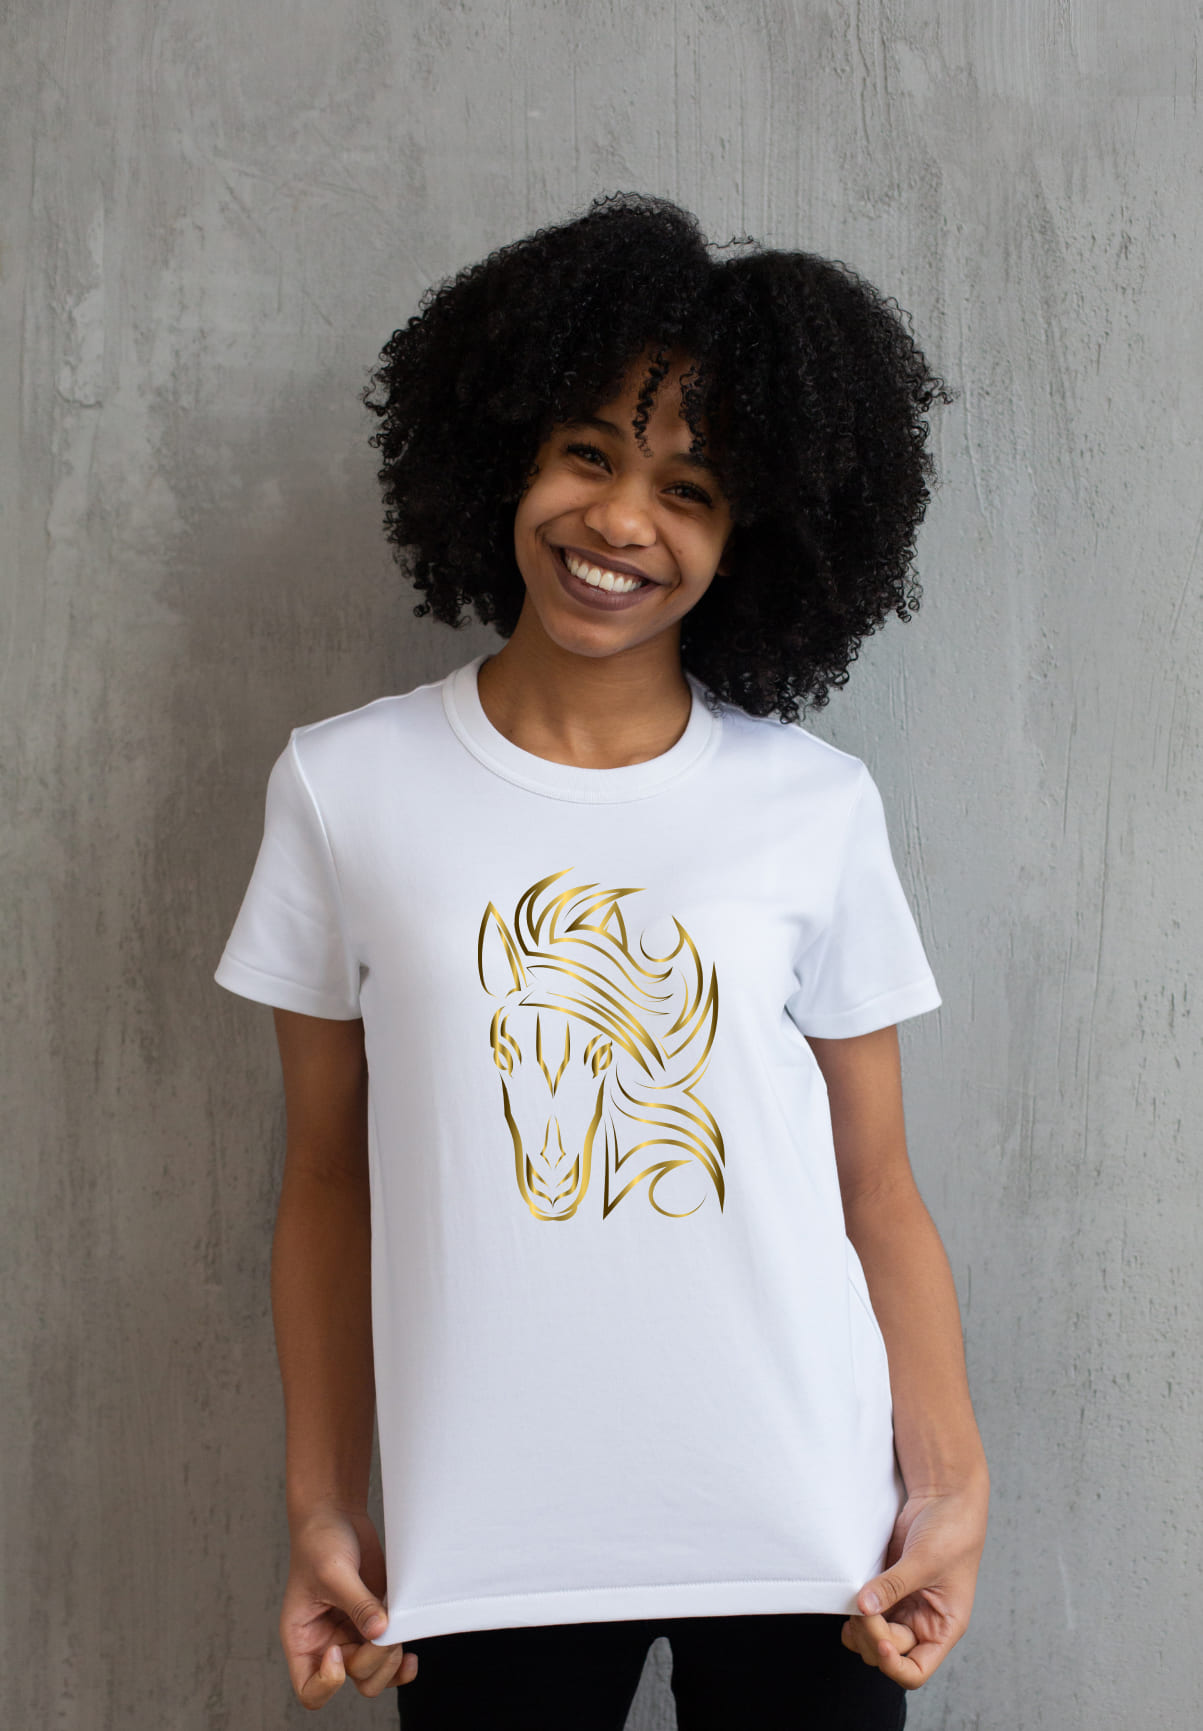 White t-shirt with a golden horse face on a girl.